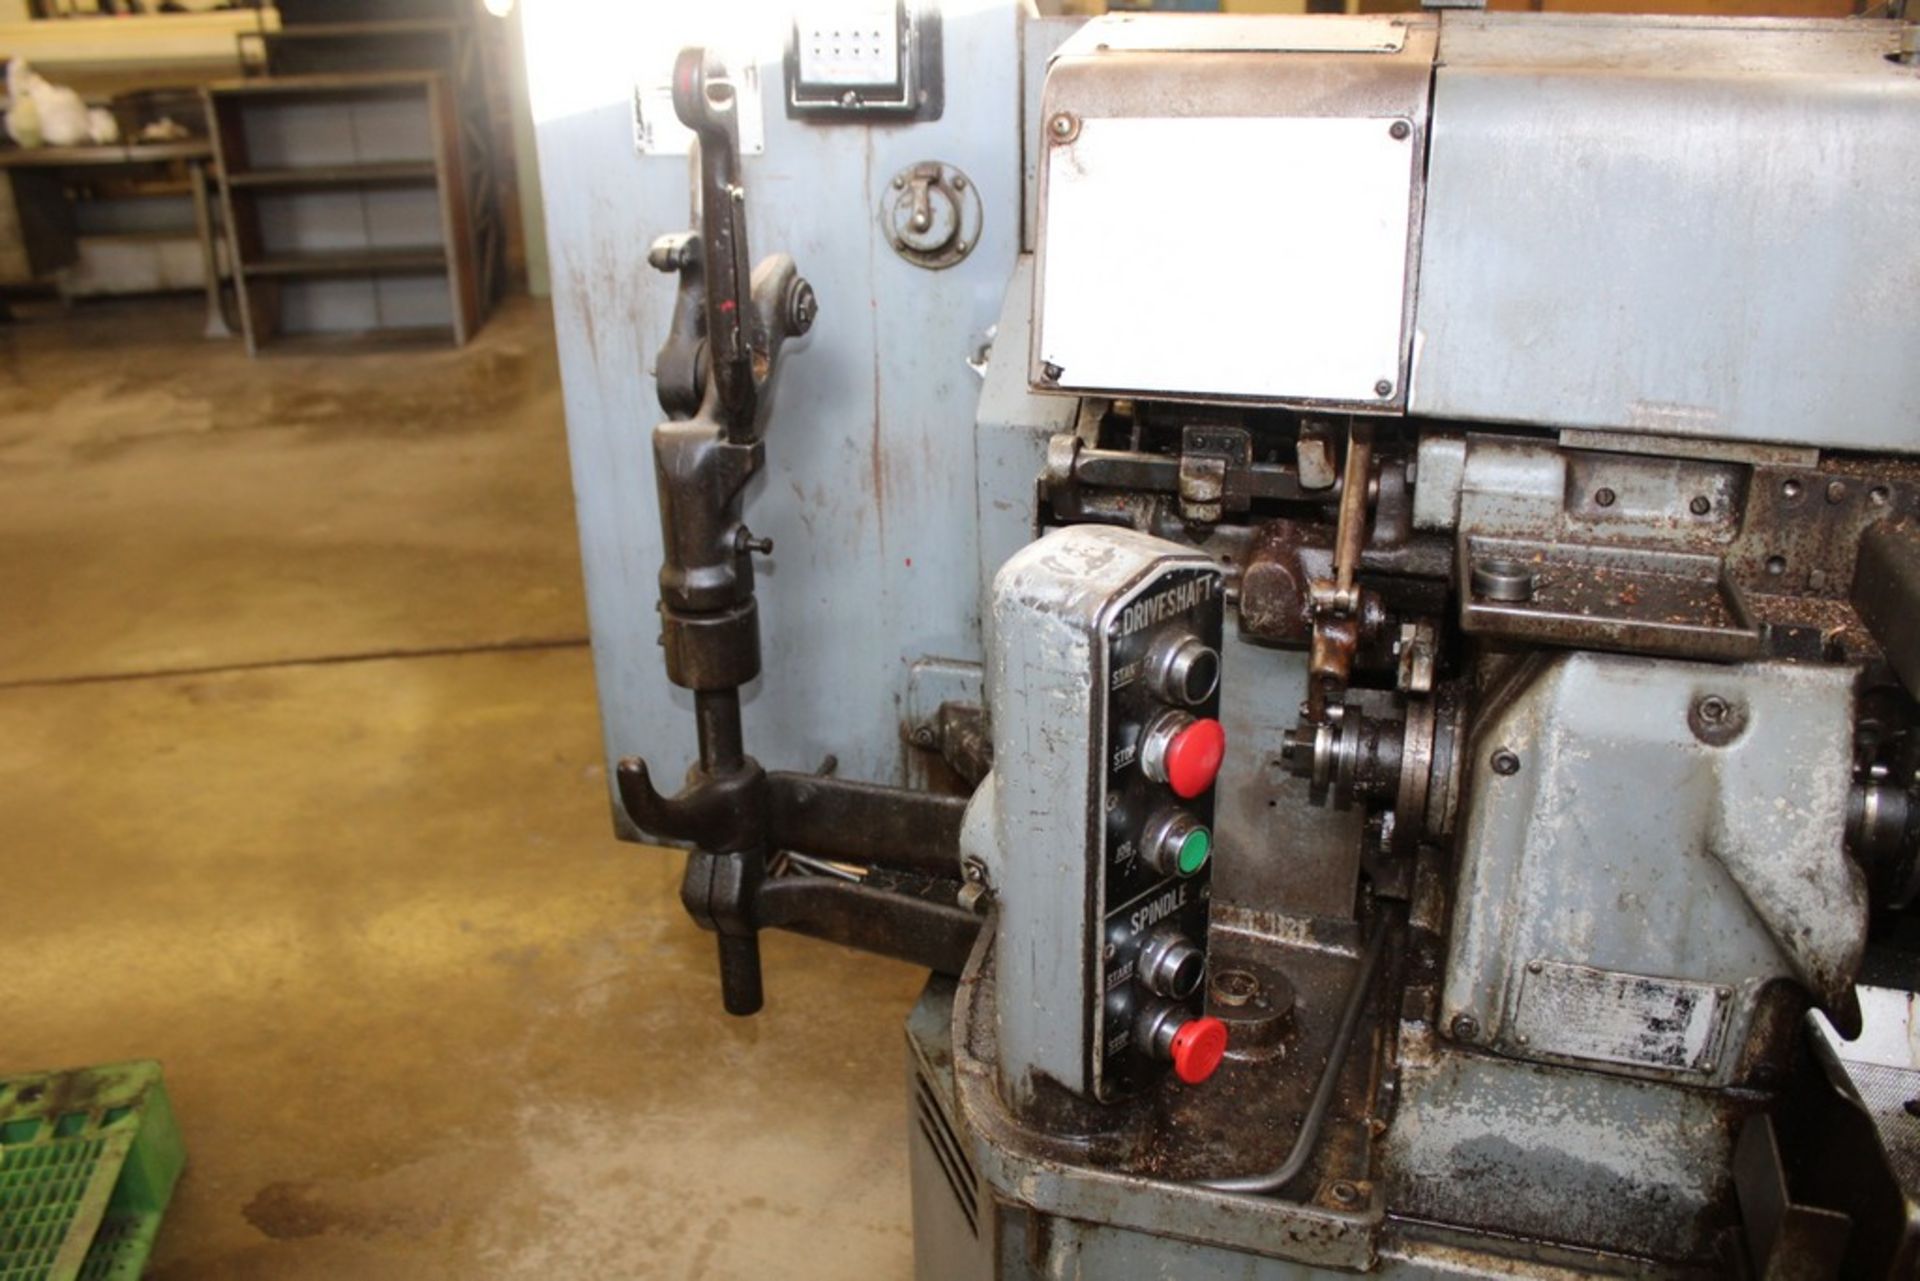 BROWN & SHARPE 1/2" NO. 00 PUSH BUTTON AUTOMATIC SCREW MACHINE, S/N 542-00-6066, WITH VERTICAL - Image 2 of 4